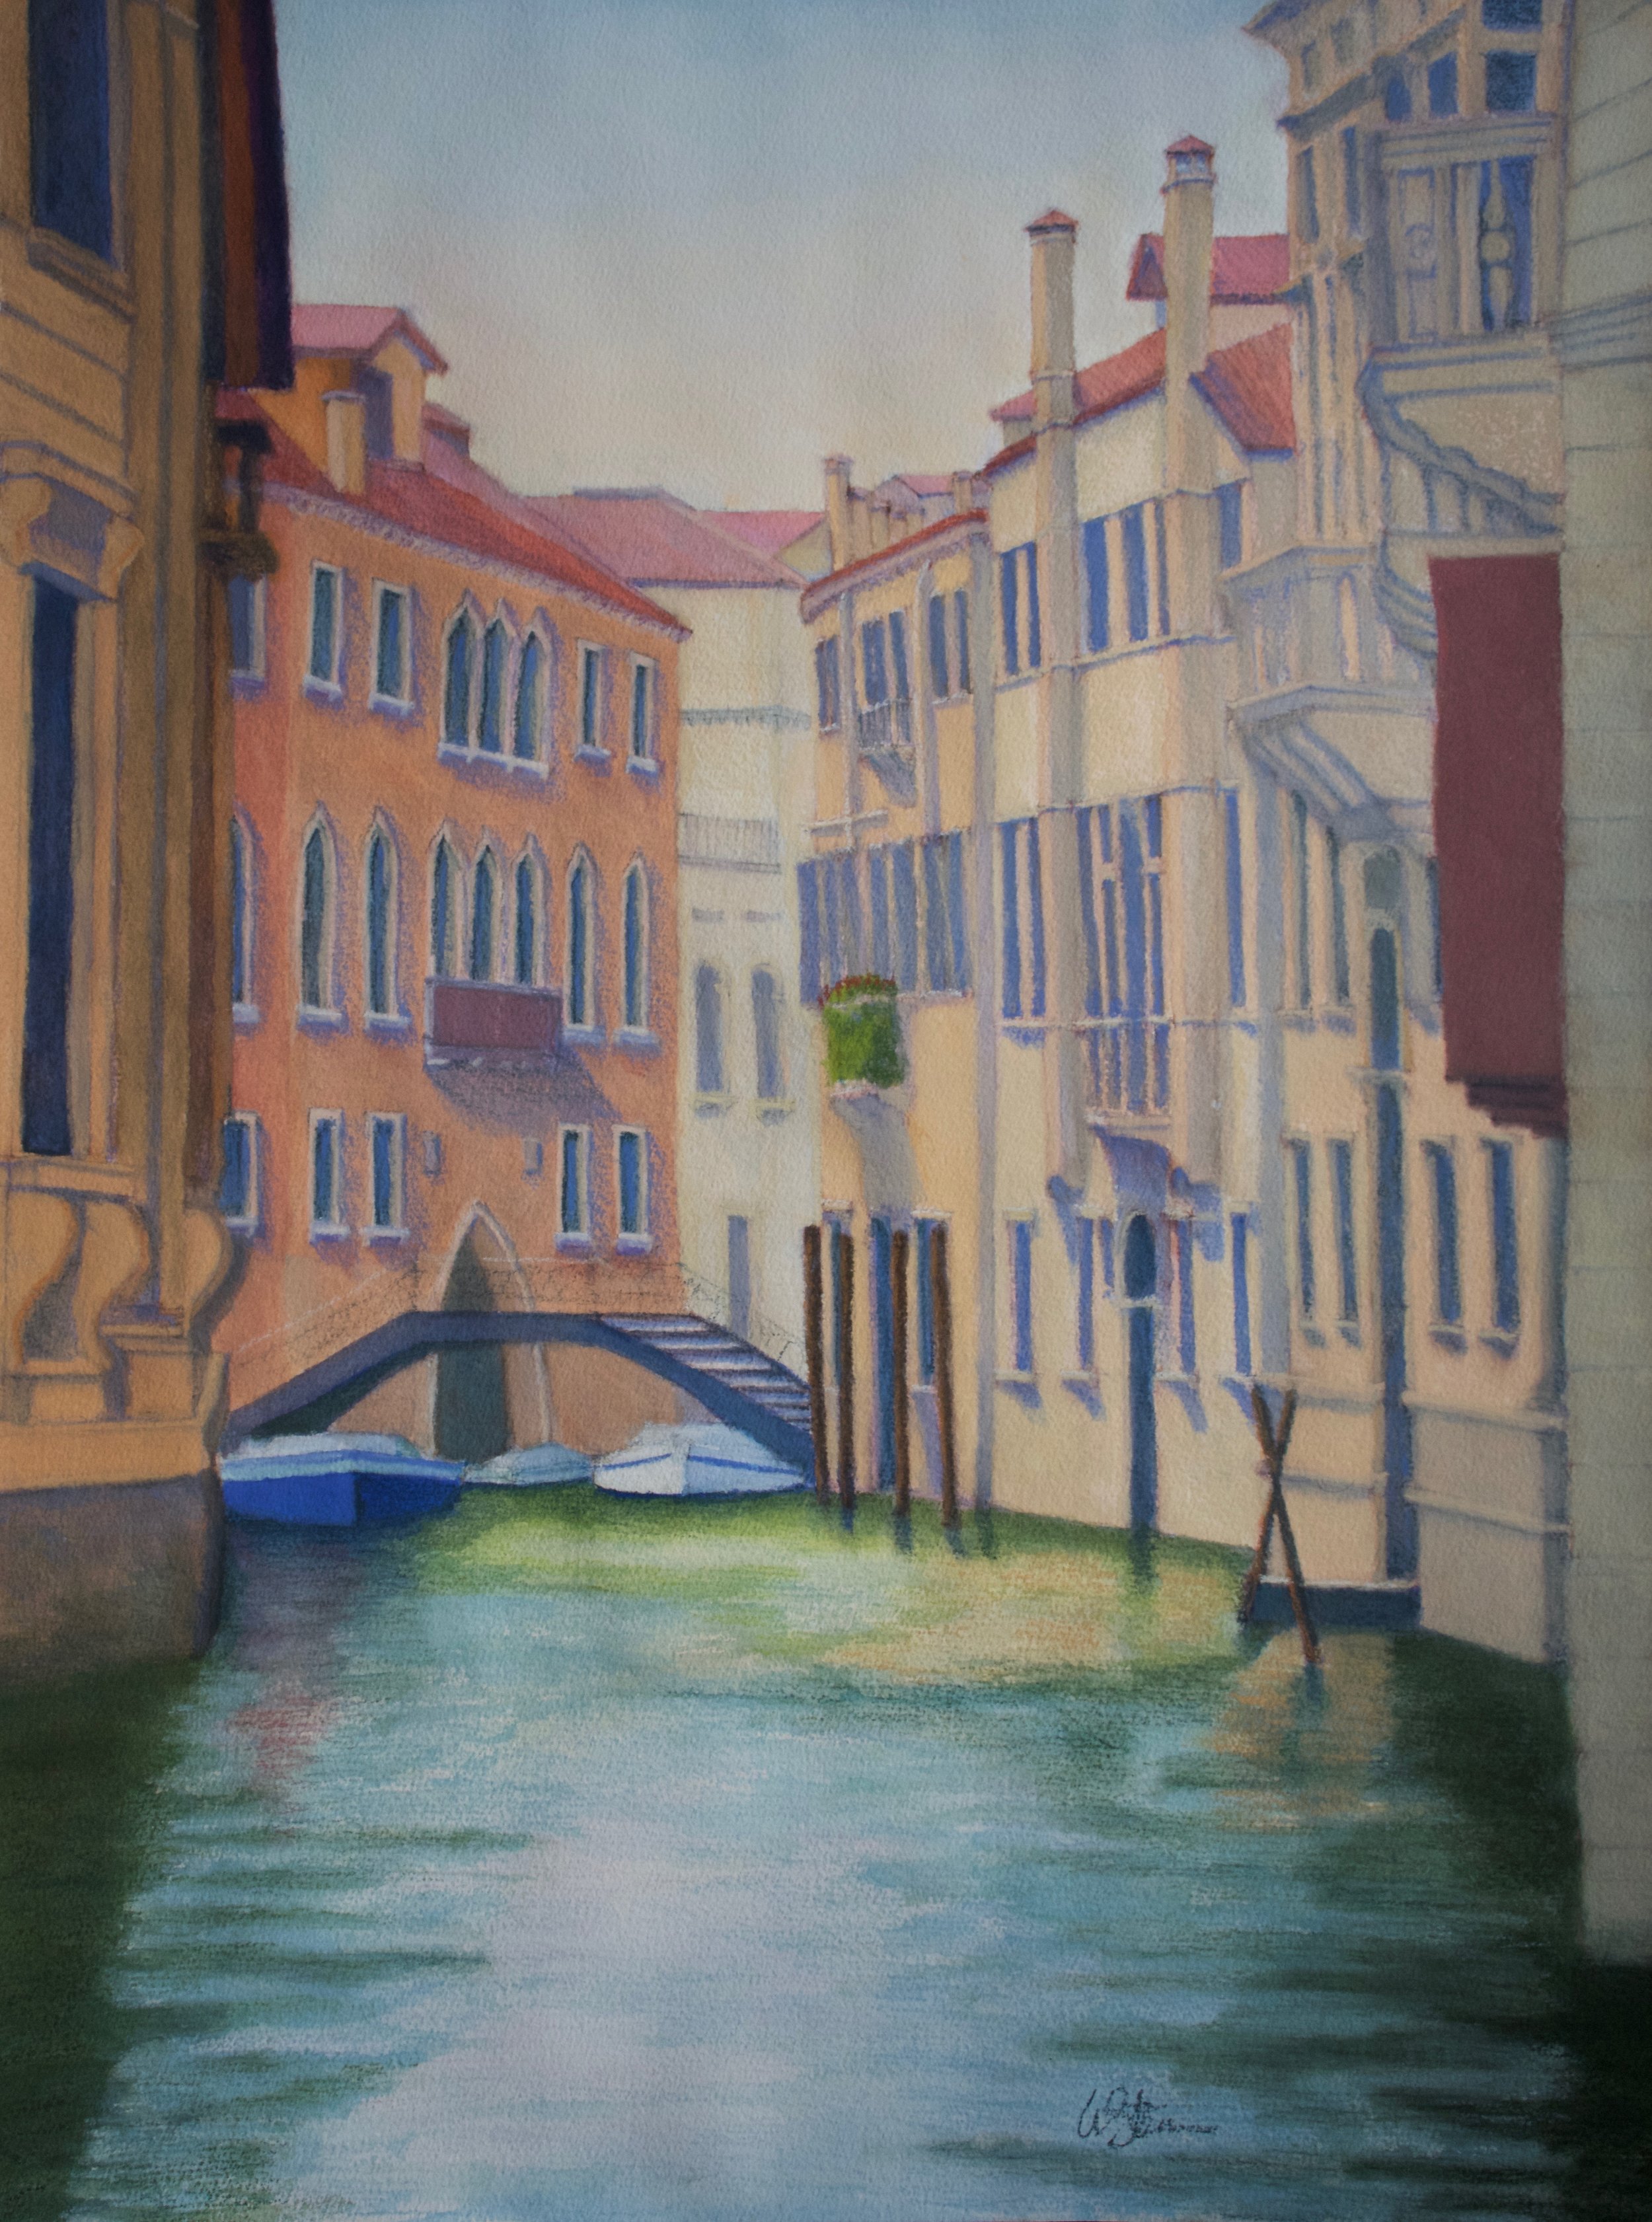  Pools of Light in a Venetian Canal, 2018  pastel on paper, 18x24 inches 